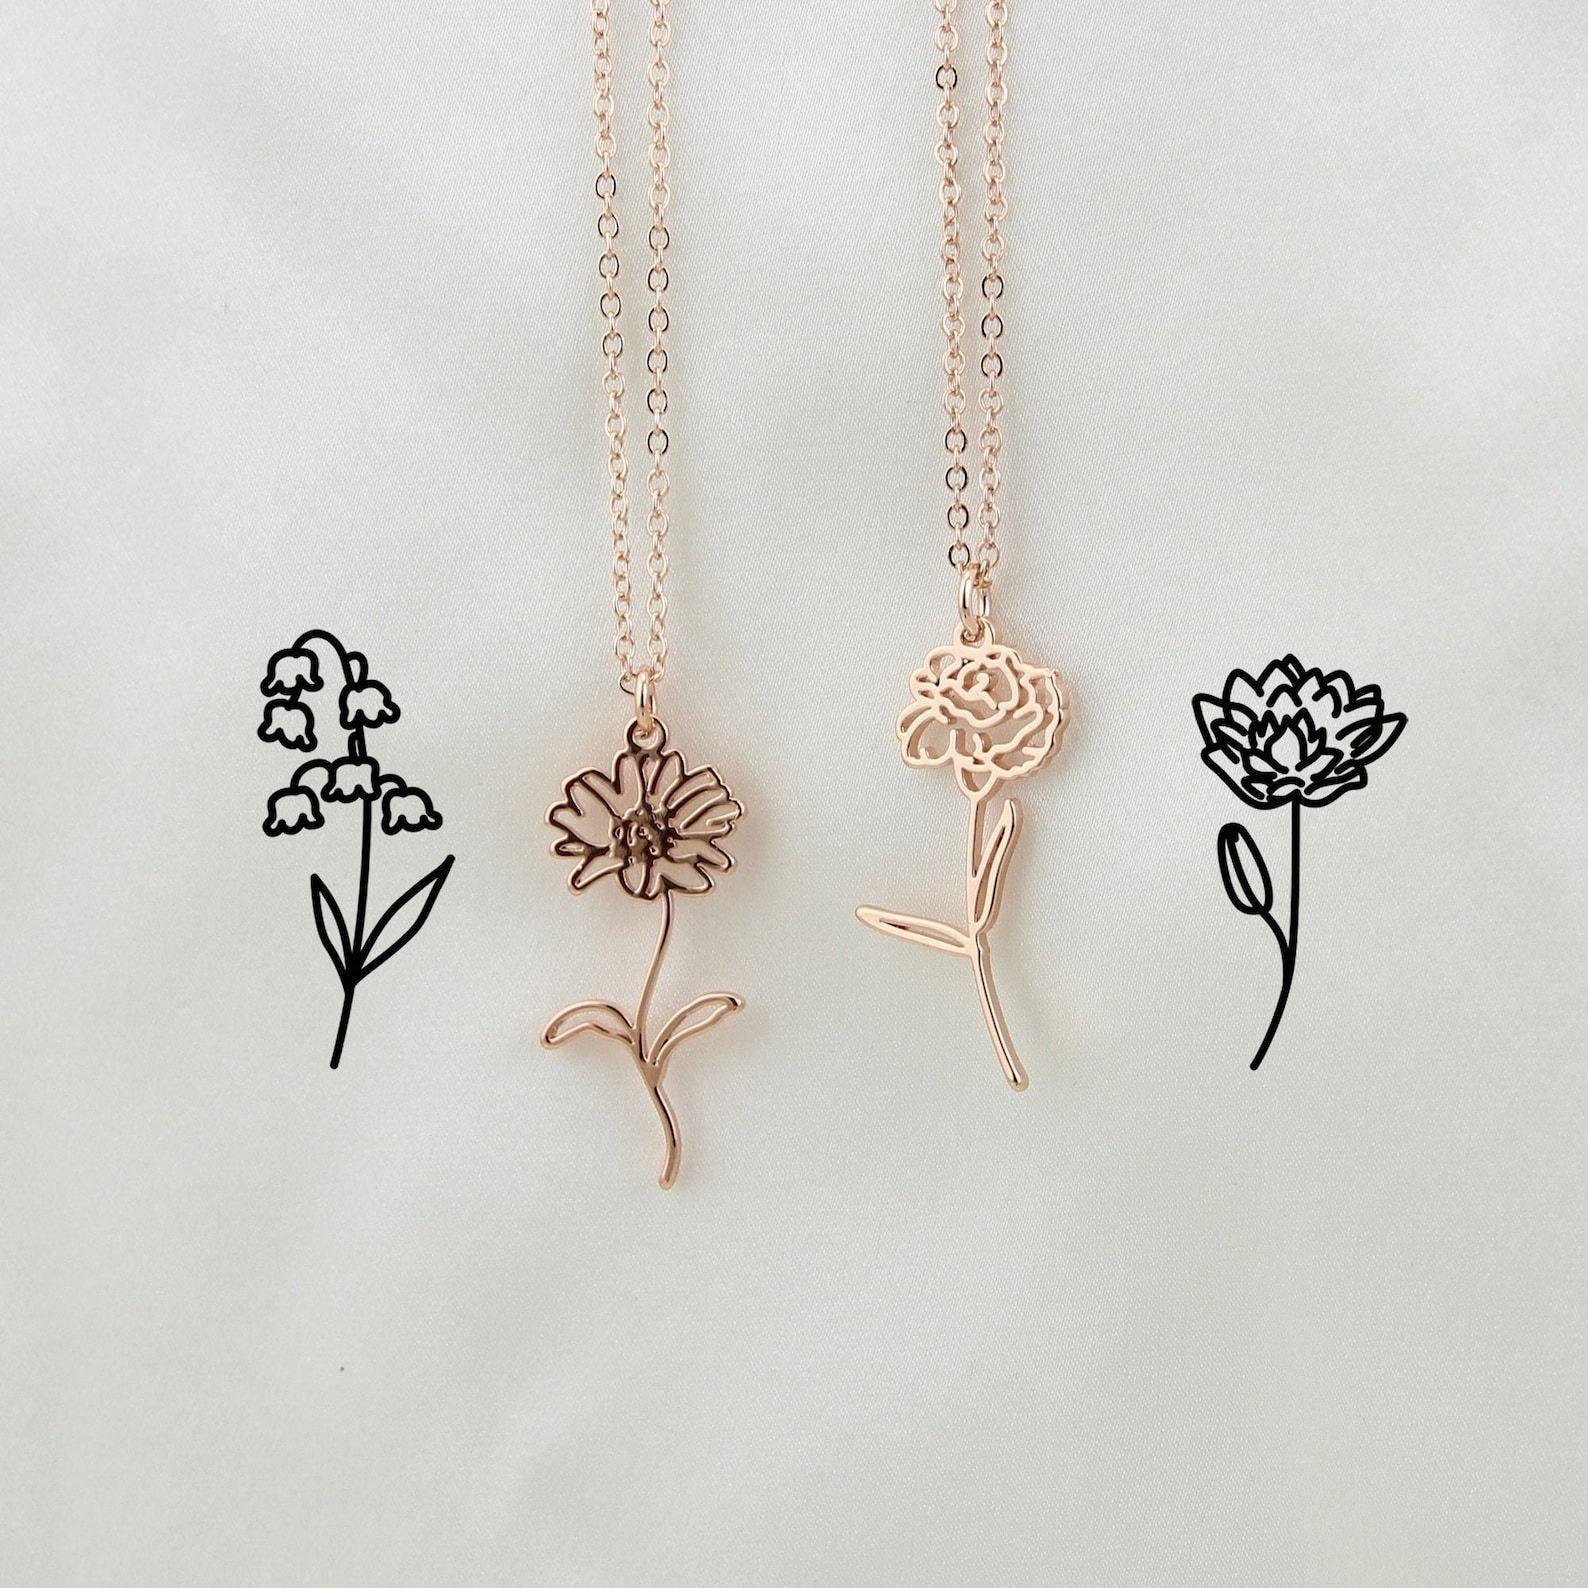 Wholesale Personalized Birth Month Flower Necklace, Mother Day Jewelry,  Name Necklace With Birth Flower, Gift For Friends, Poppy Flower, Sunflower  for your store